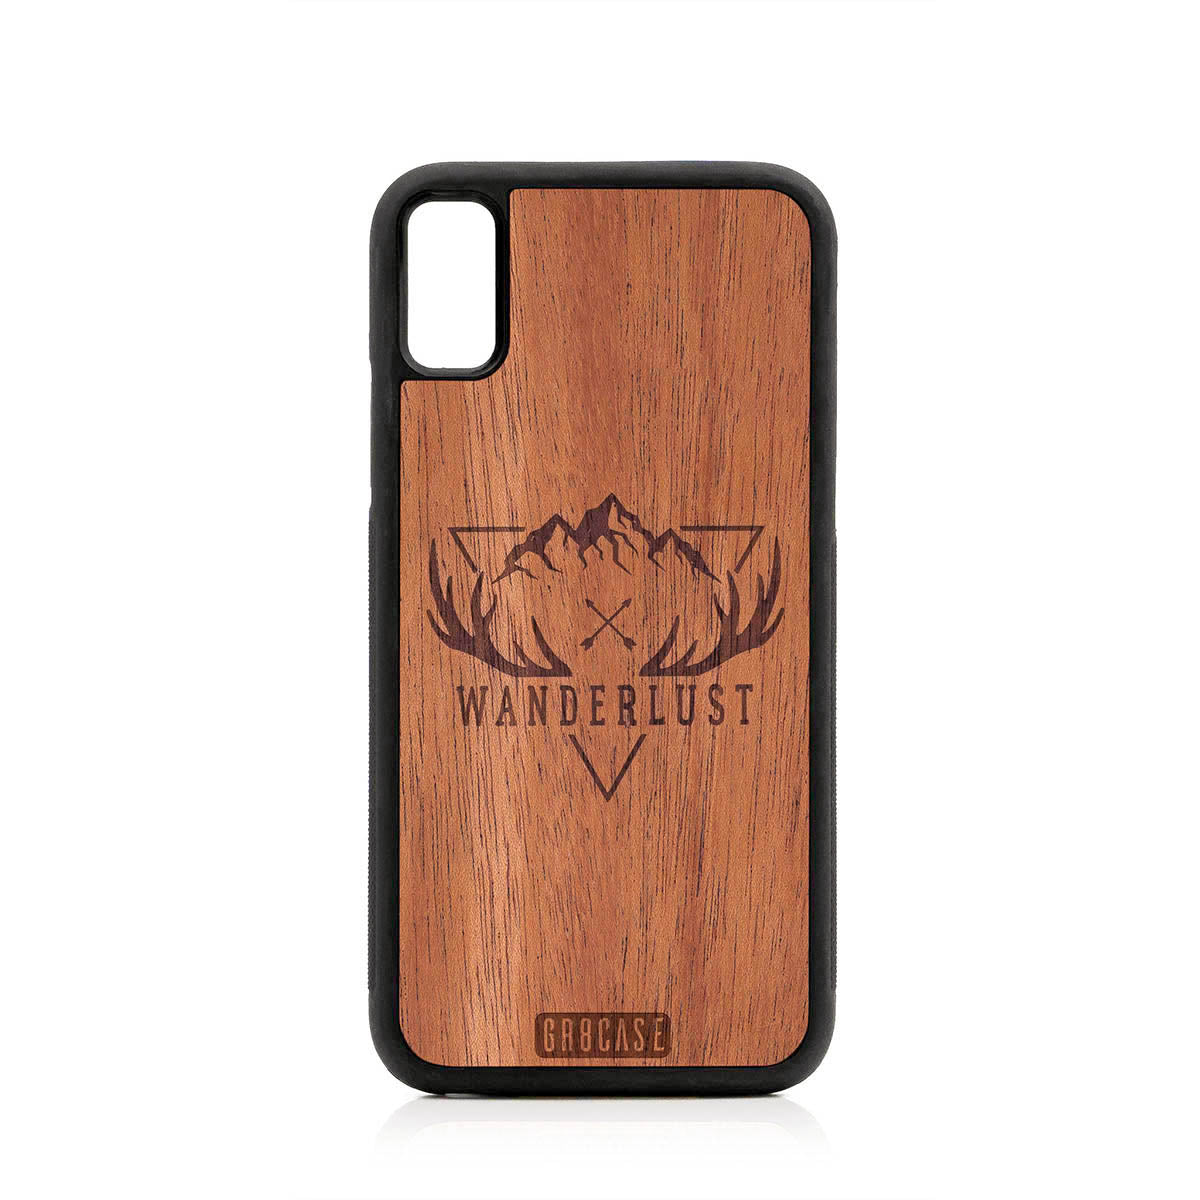 Wanderlust Design Wood Case For iPhone XS Max